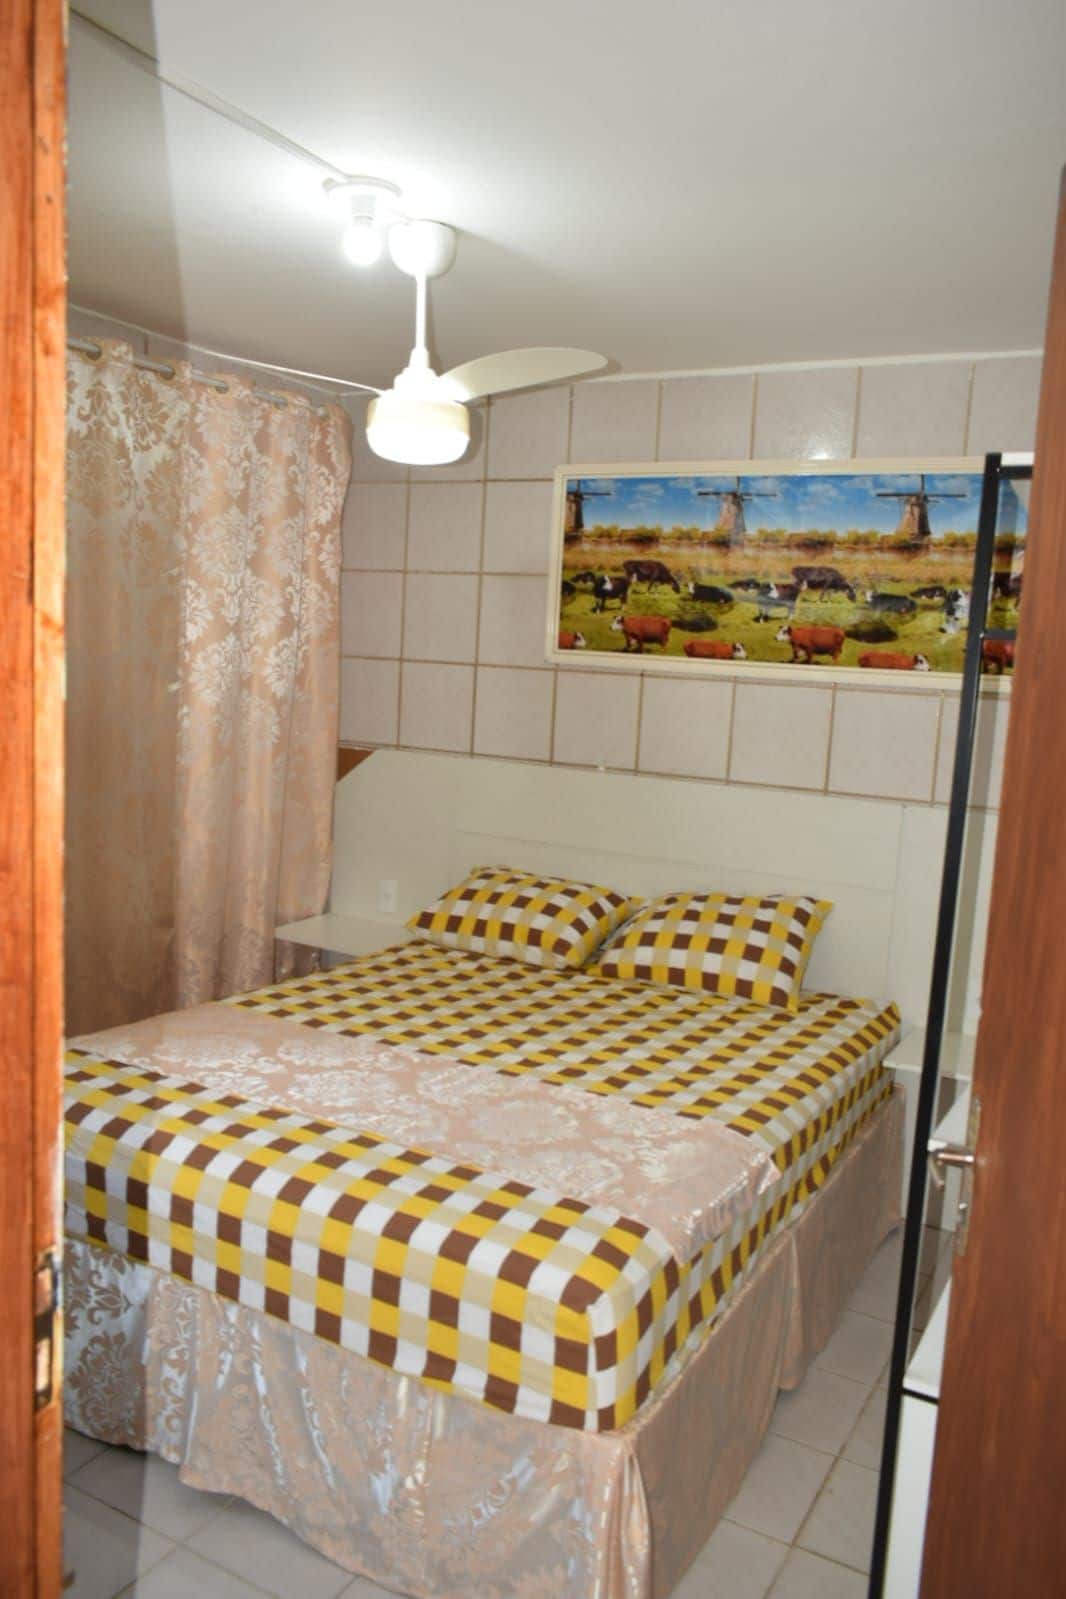 Queen bed, family/Friends, upto 4 persons